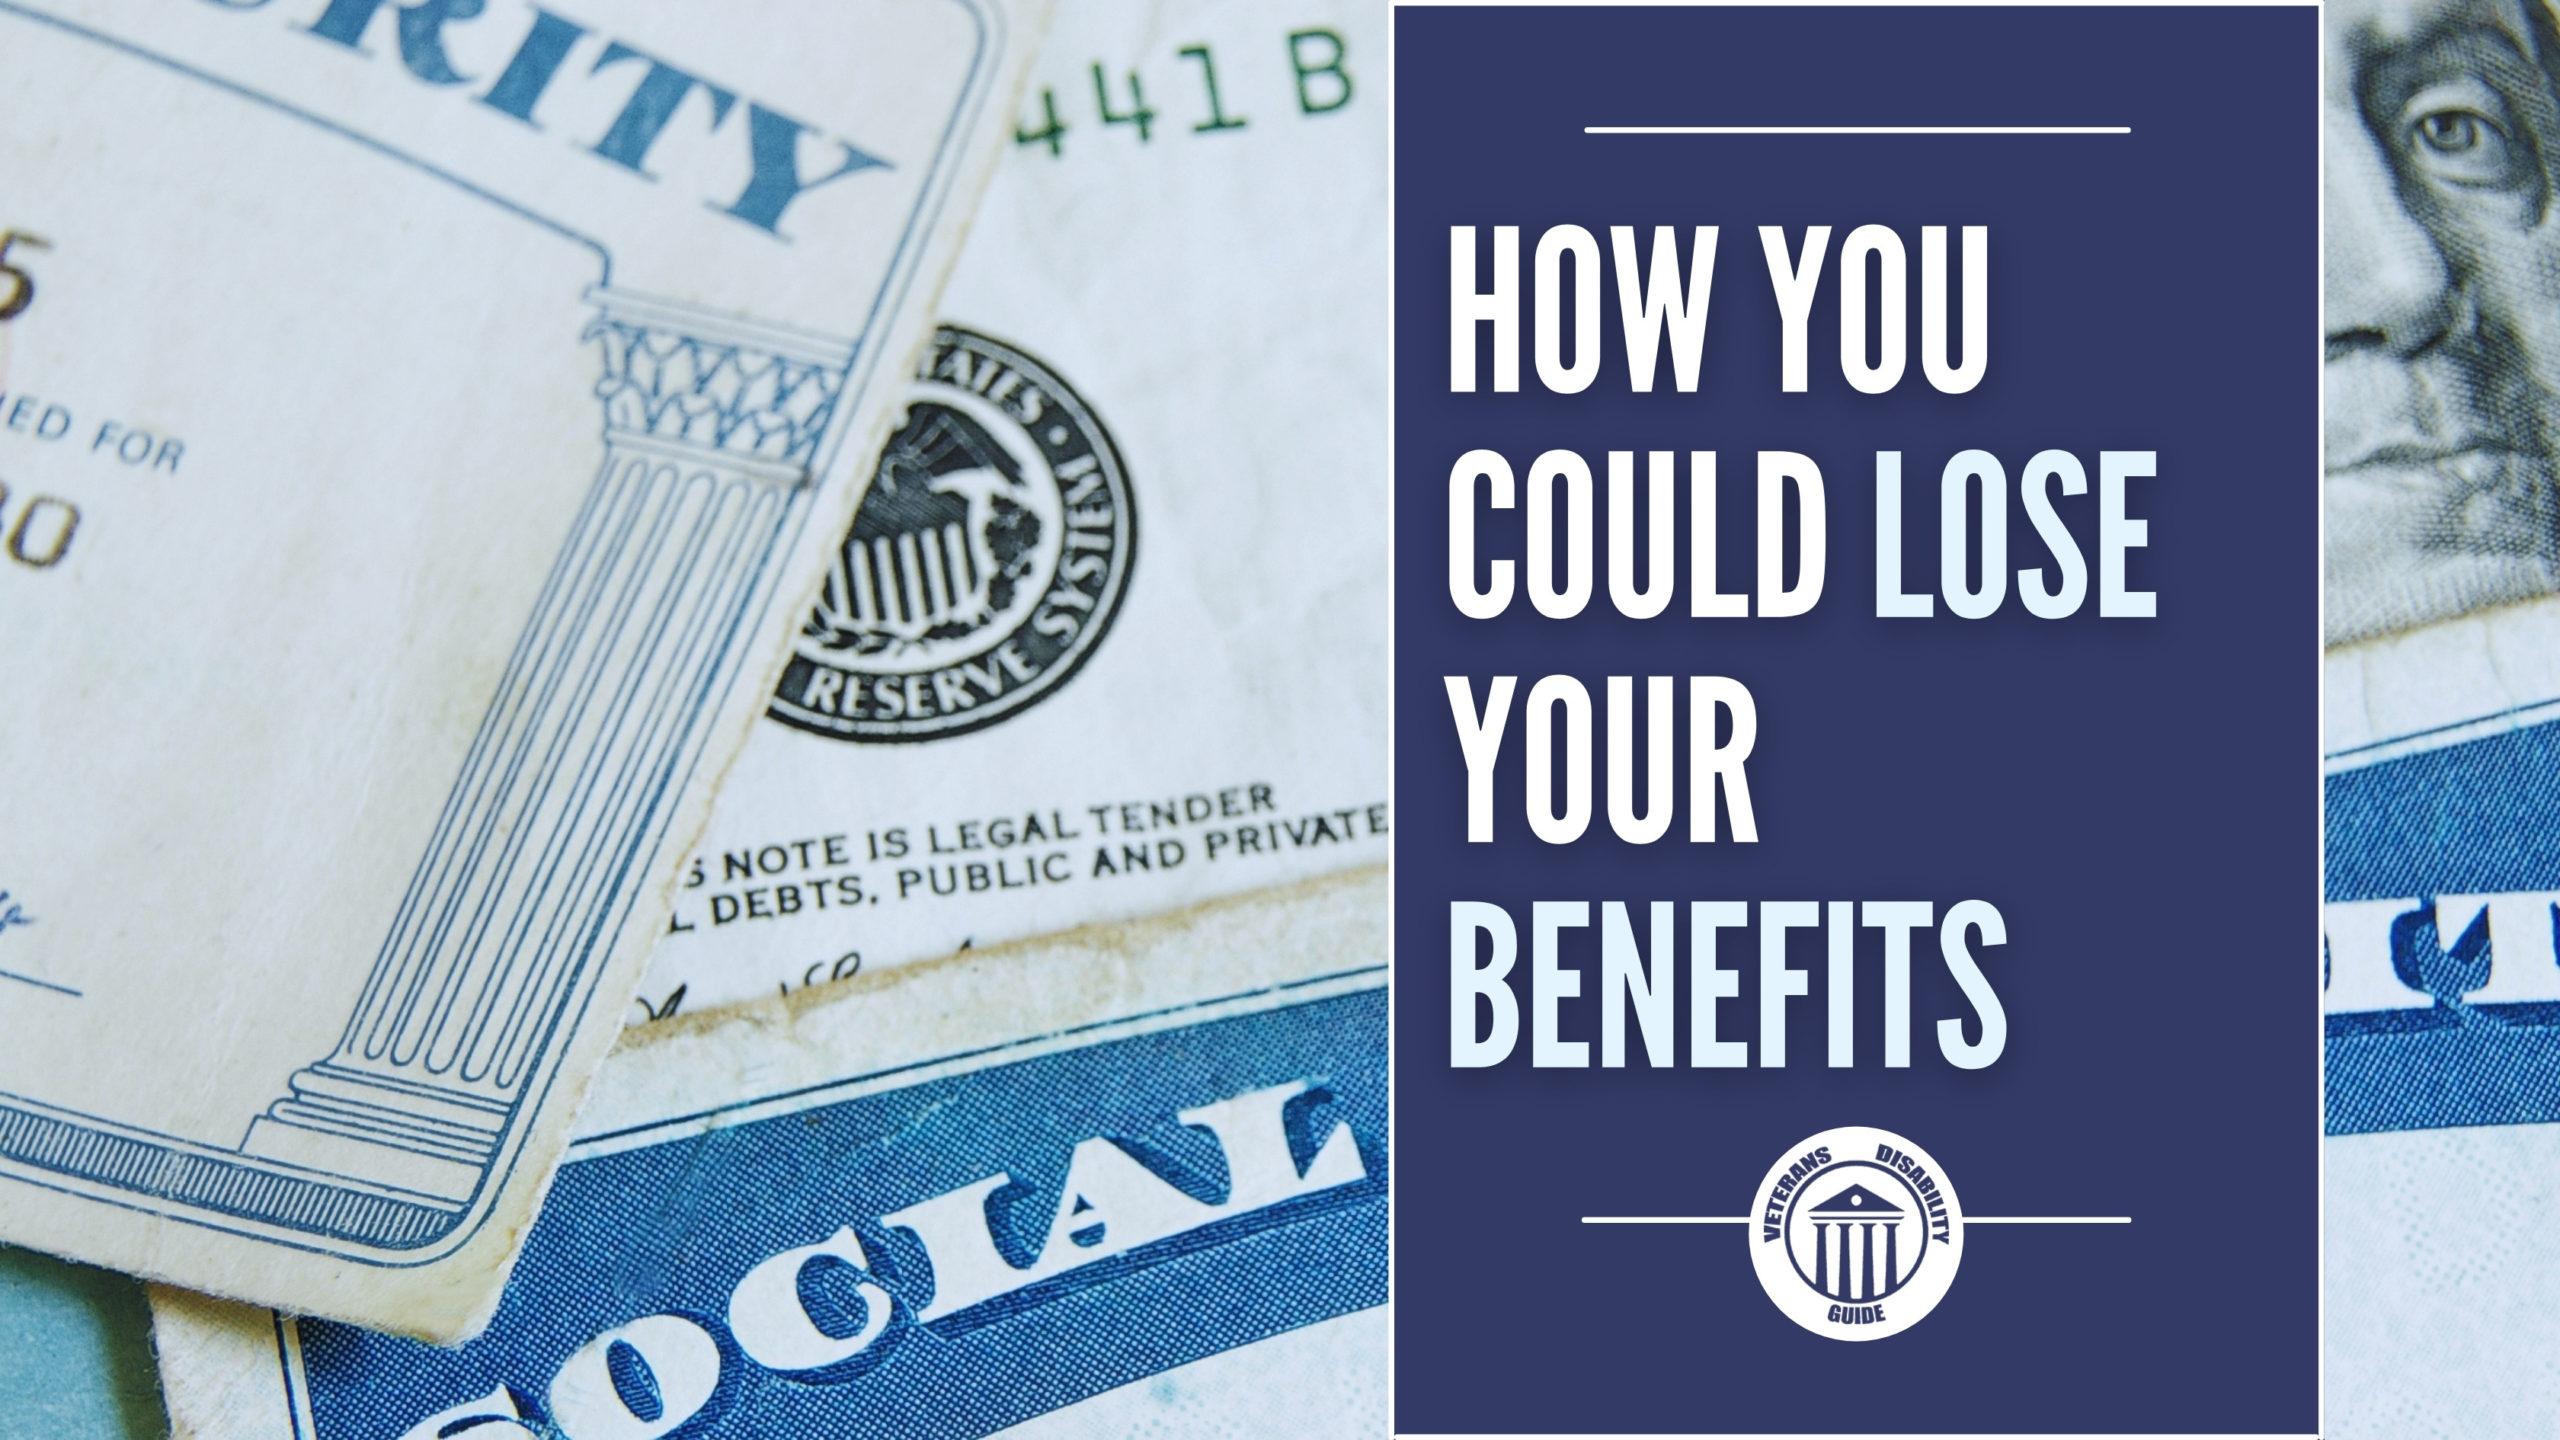 How You Could Lose Your Benefits blog header image